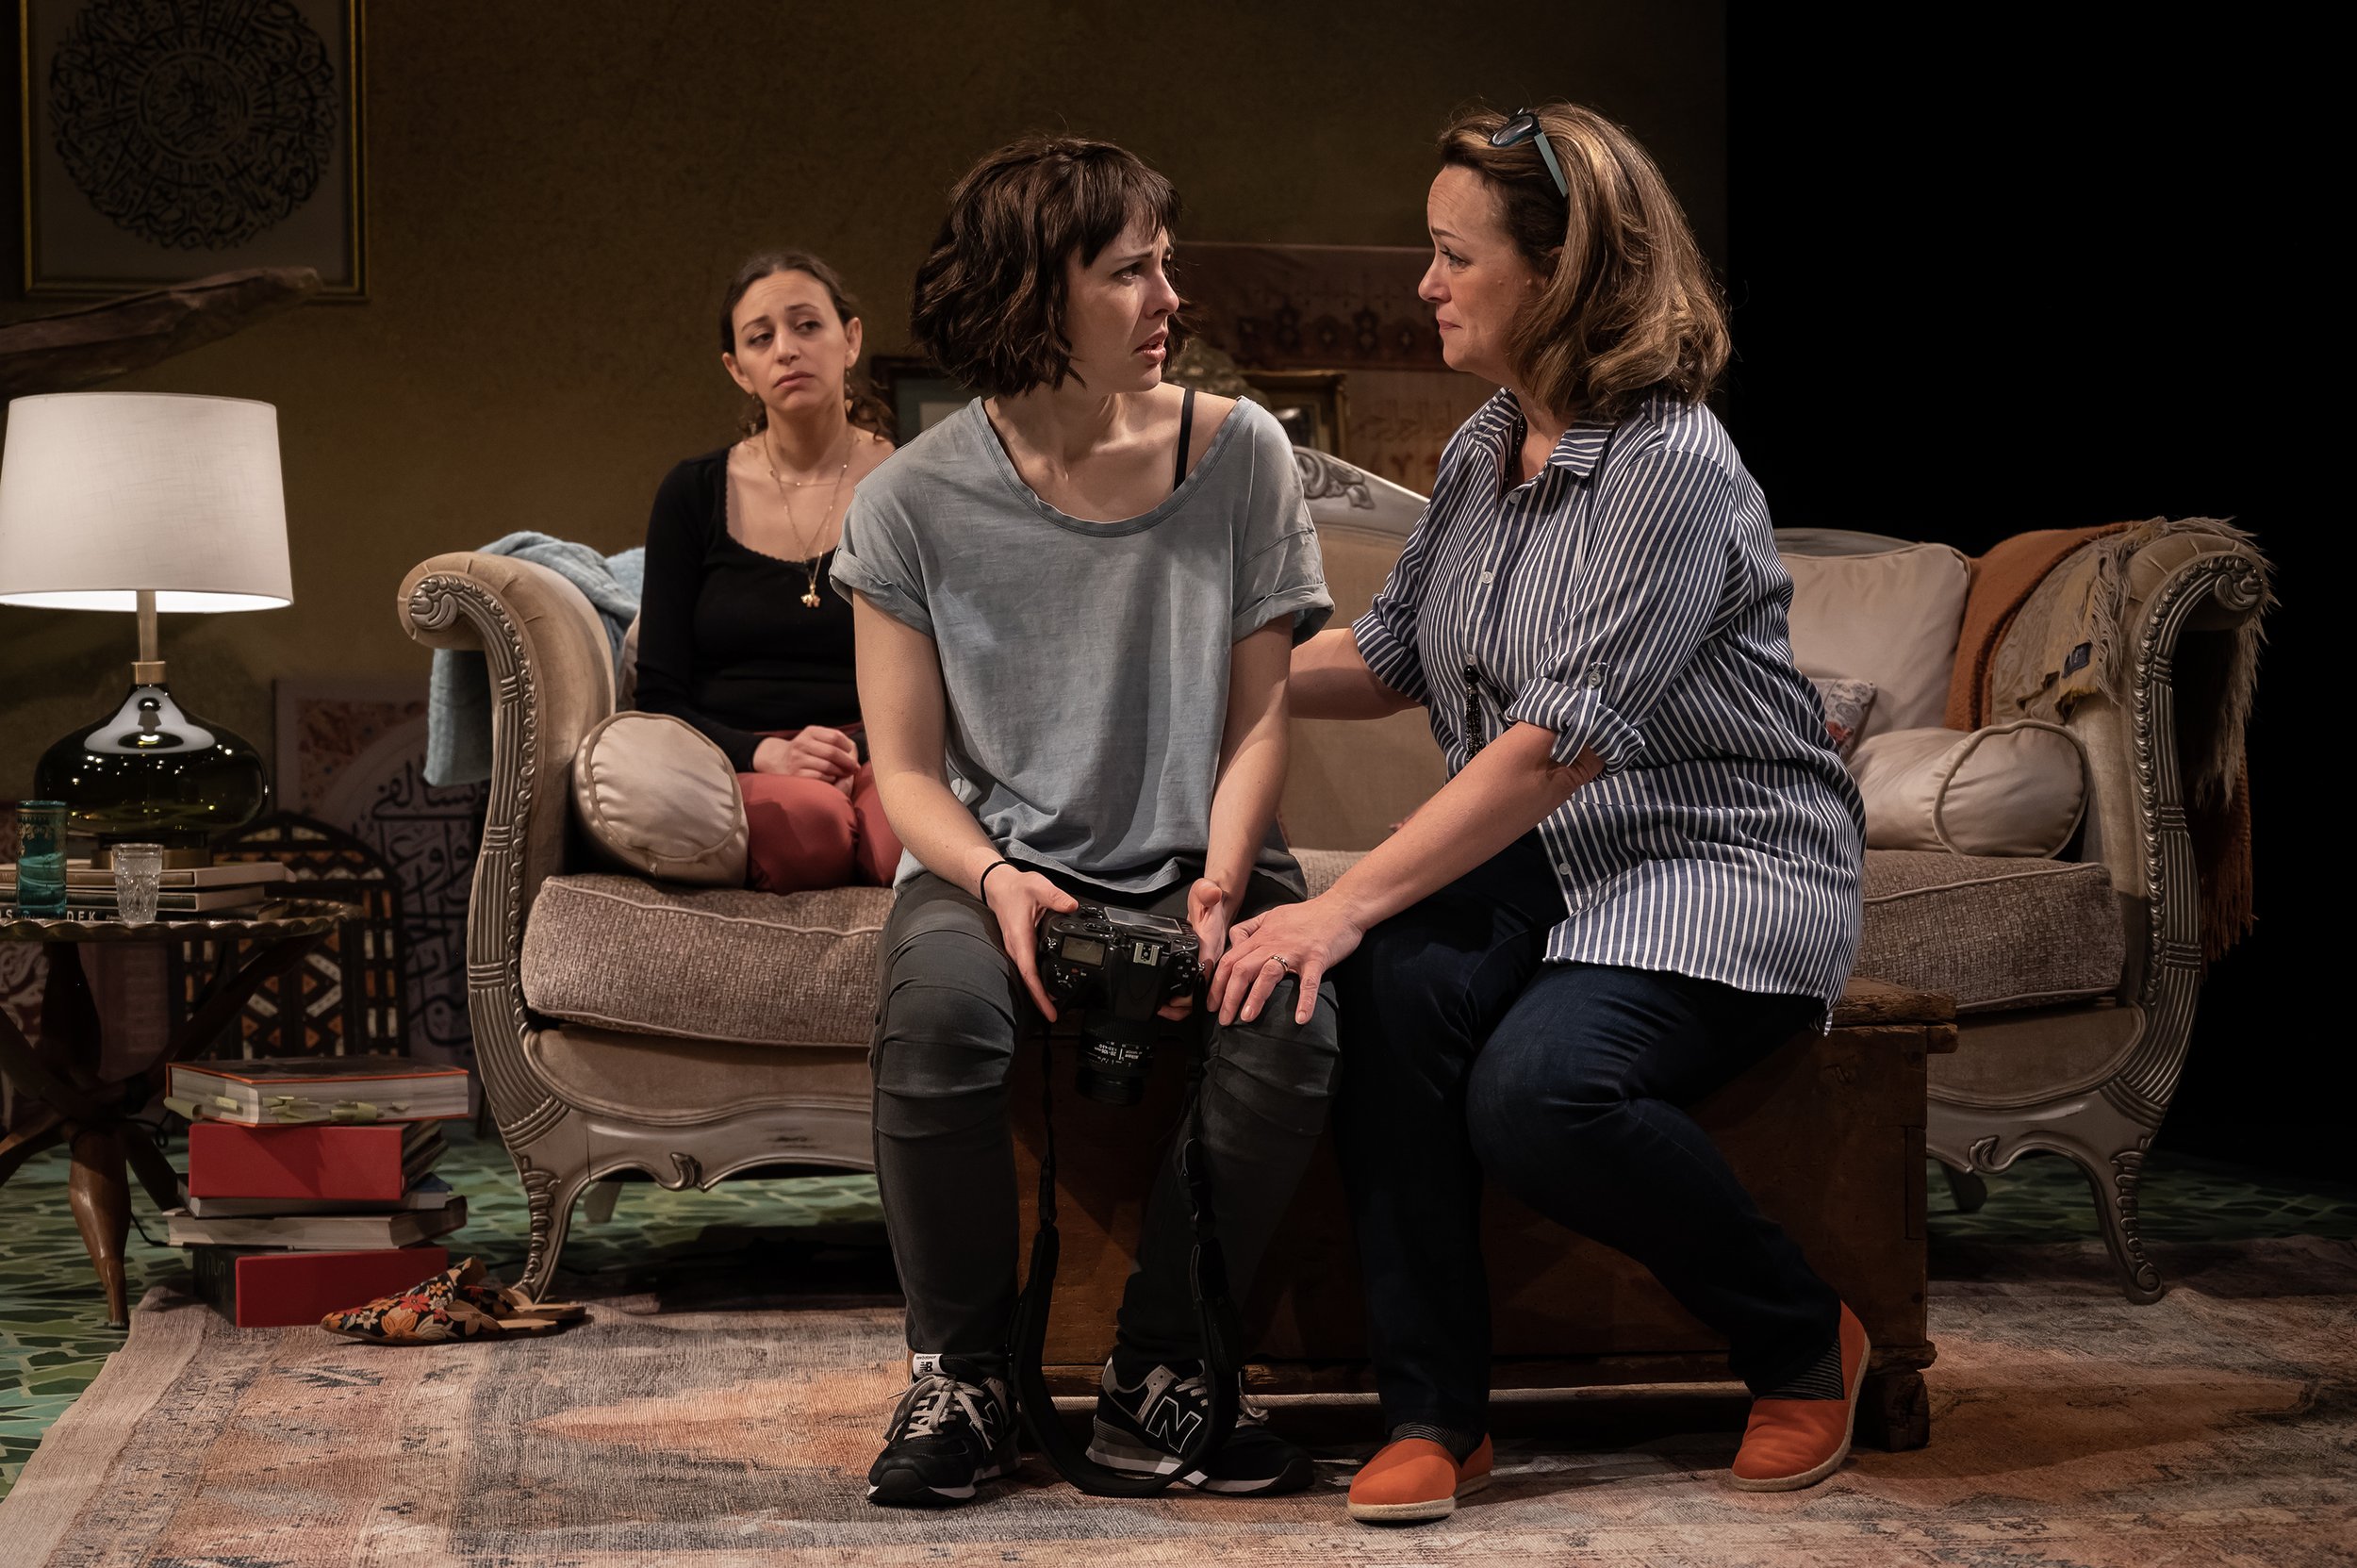  Katie Kleiger as Mia and Emily Towsnley as her mother, Jane, with Dina Soltan&nbsp;as Derya in Mona Mansour’s  UNSEEN . Photo by Chris Banks.&nbsp; 